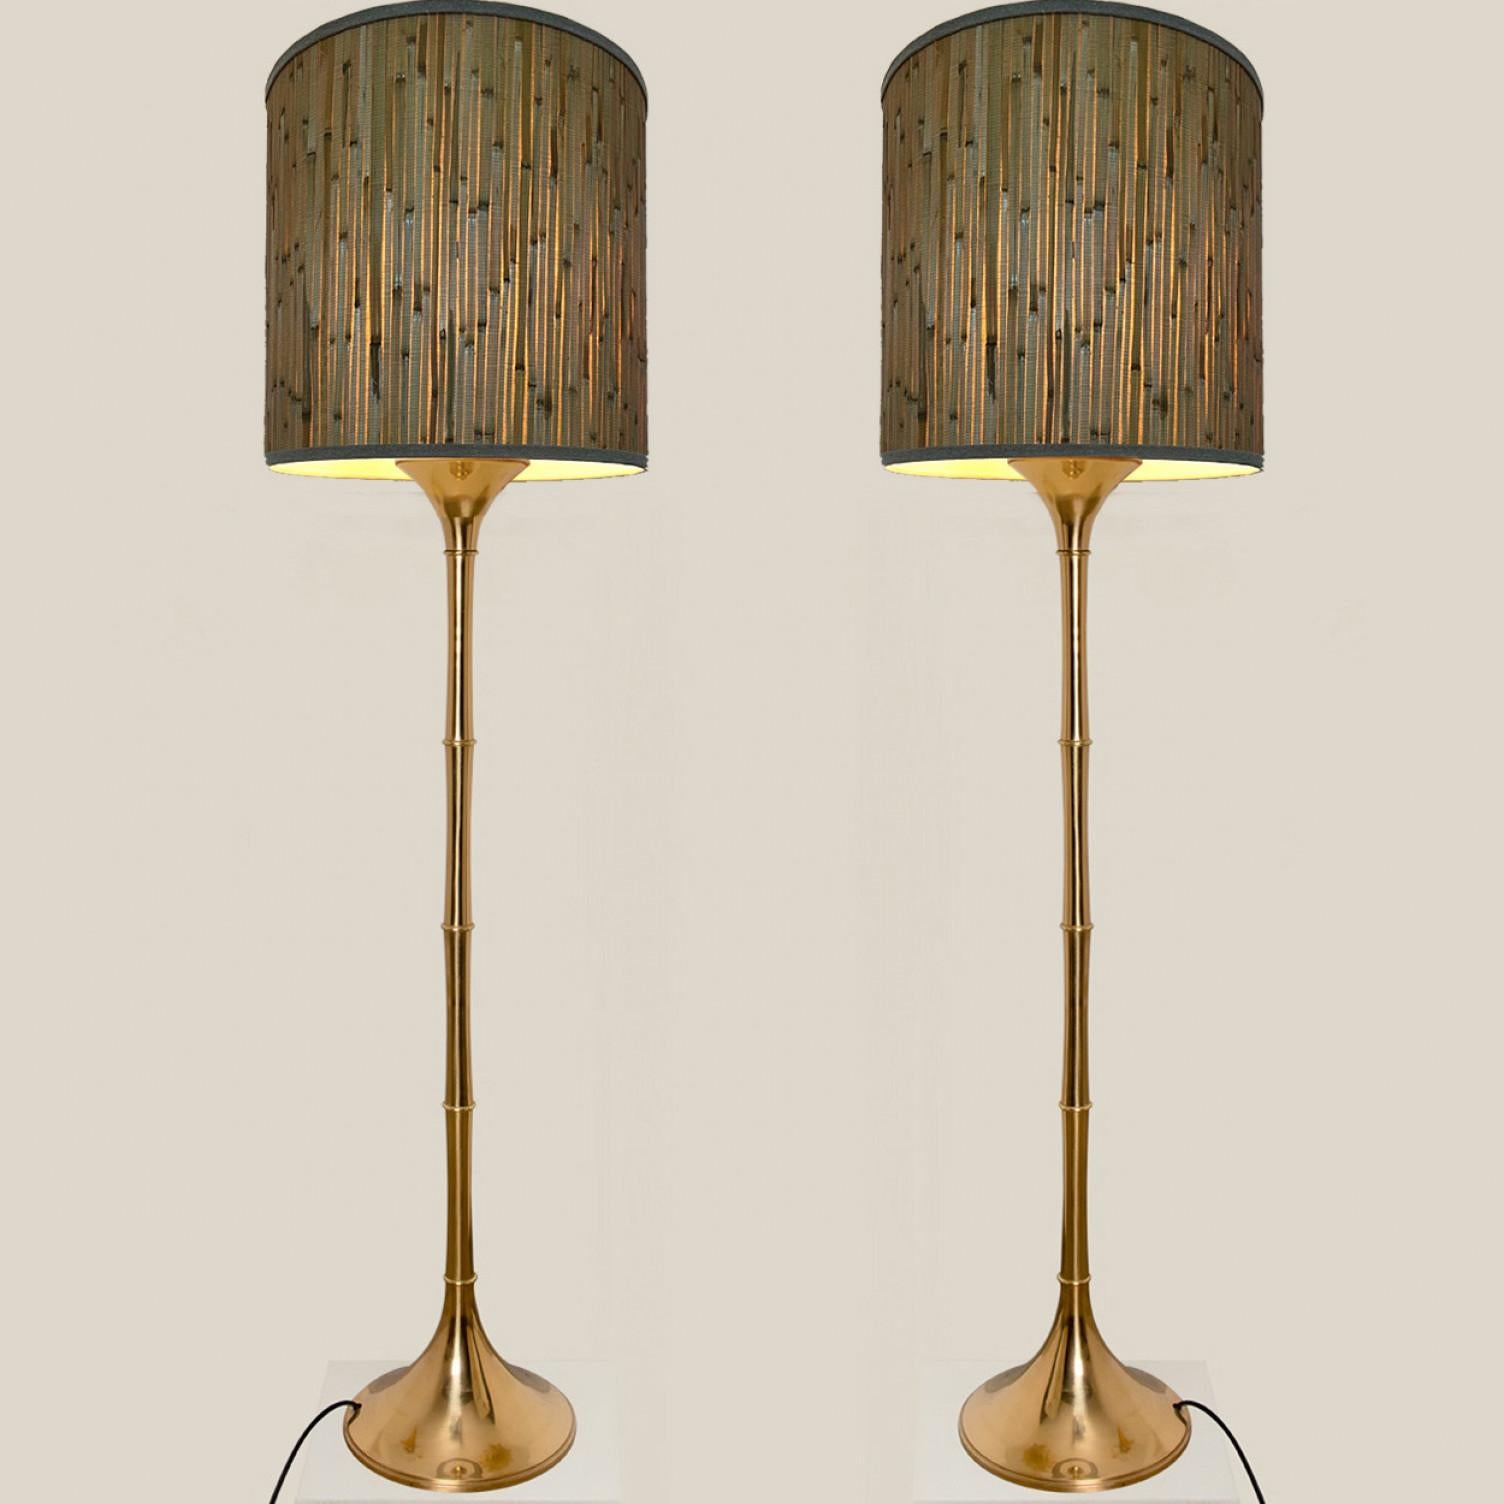 Pair of Floor Lamps Gold Brass and Bamoboo Shade by Ingo Maurer, Germany, 1968 For Sale 4